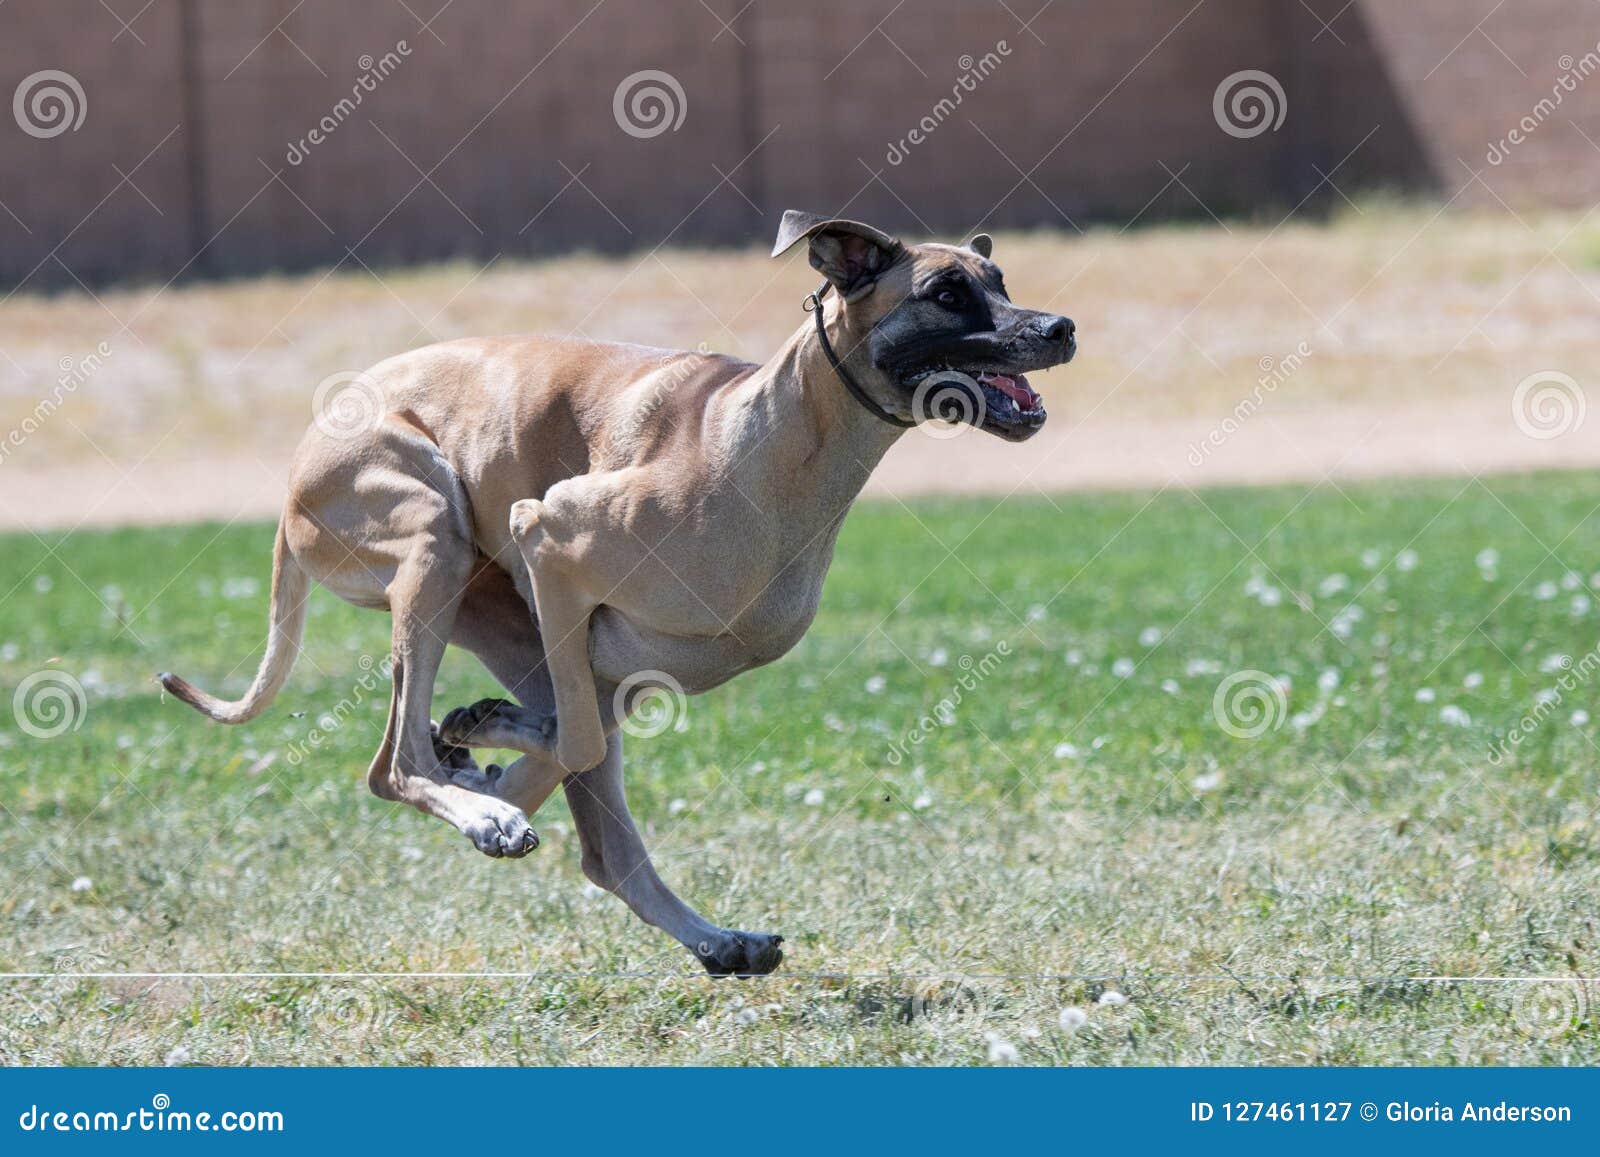 Great Dane Running in Lure Course Stock Image - Image of coursing,  outdoors: 127461127